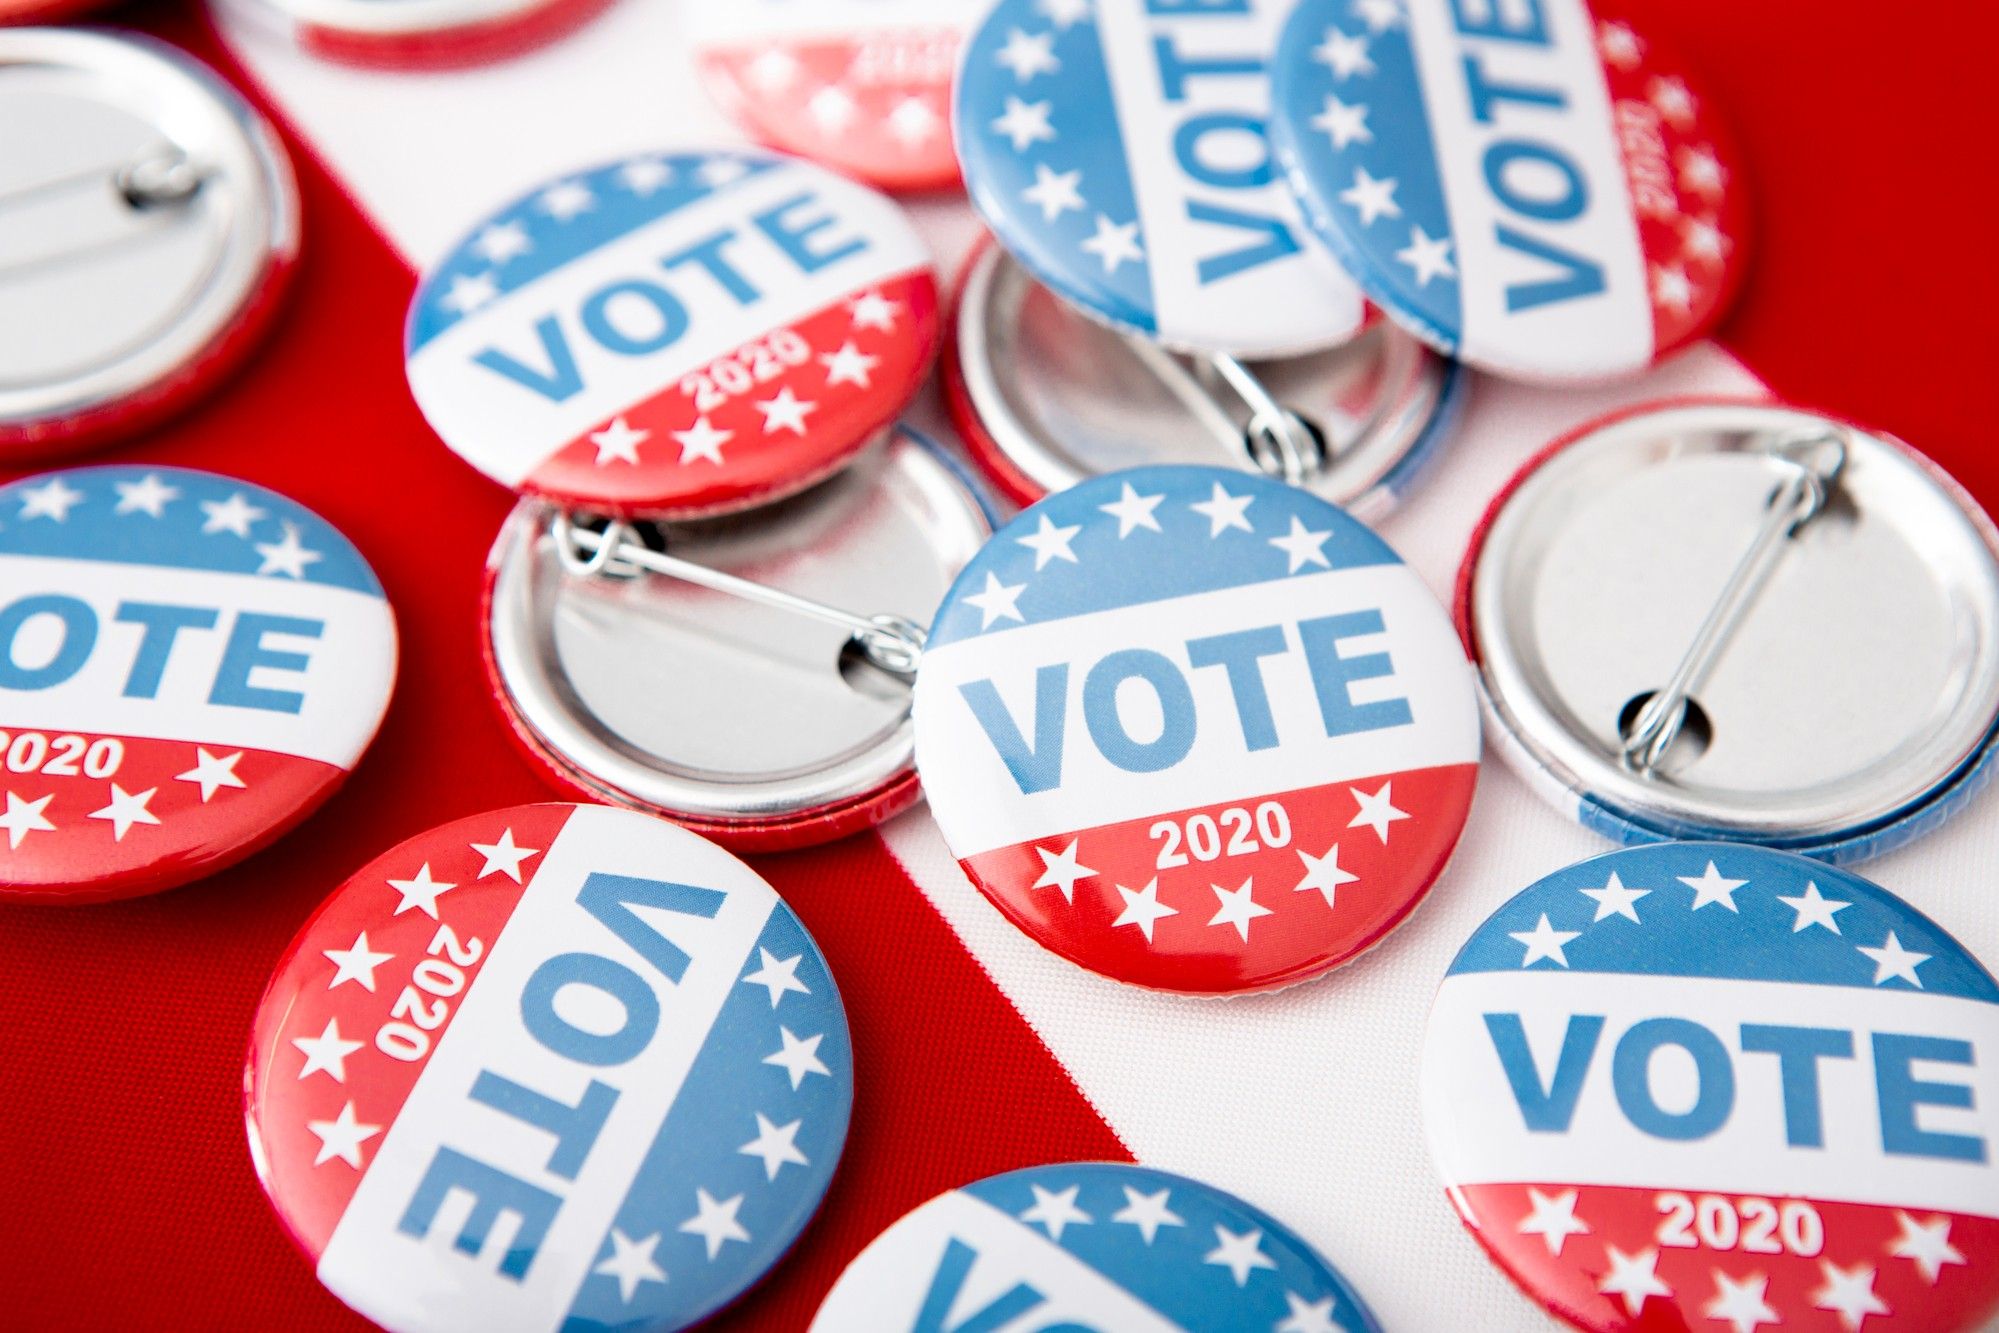 The right to vote via absentee ballot is an important issue in the U.S. presidential election. 